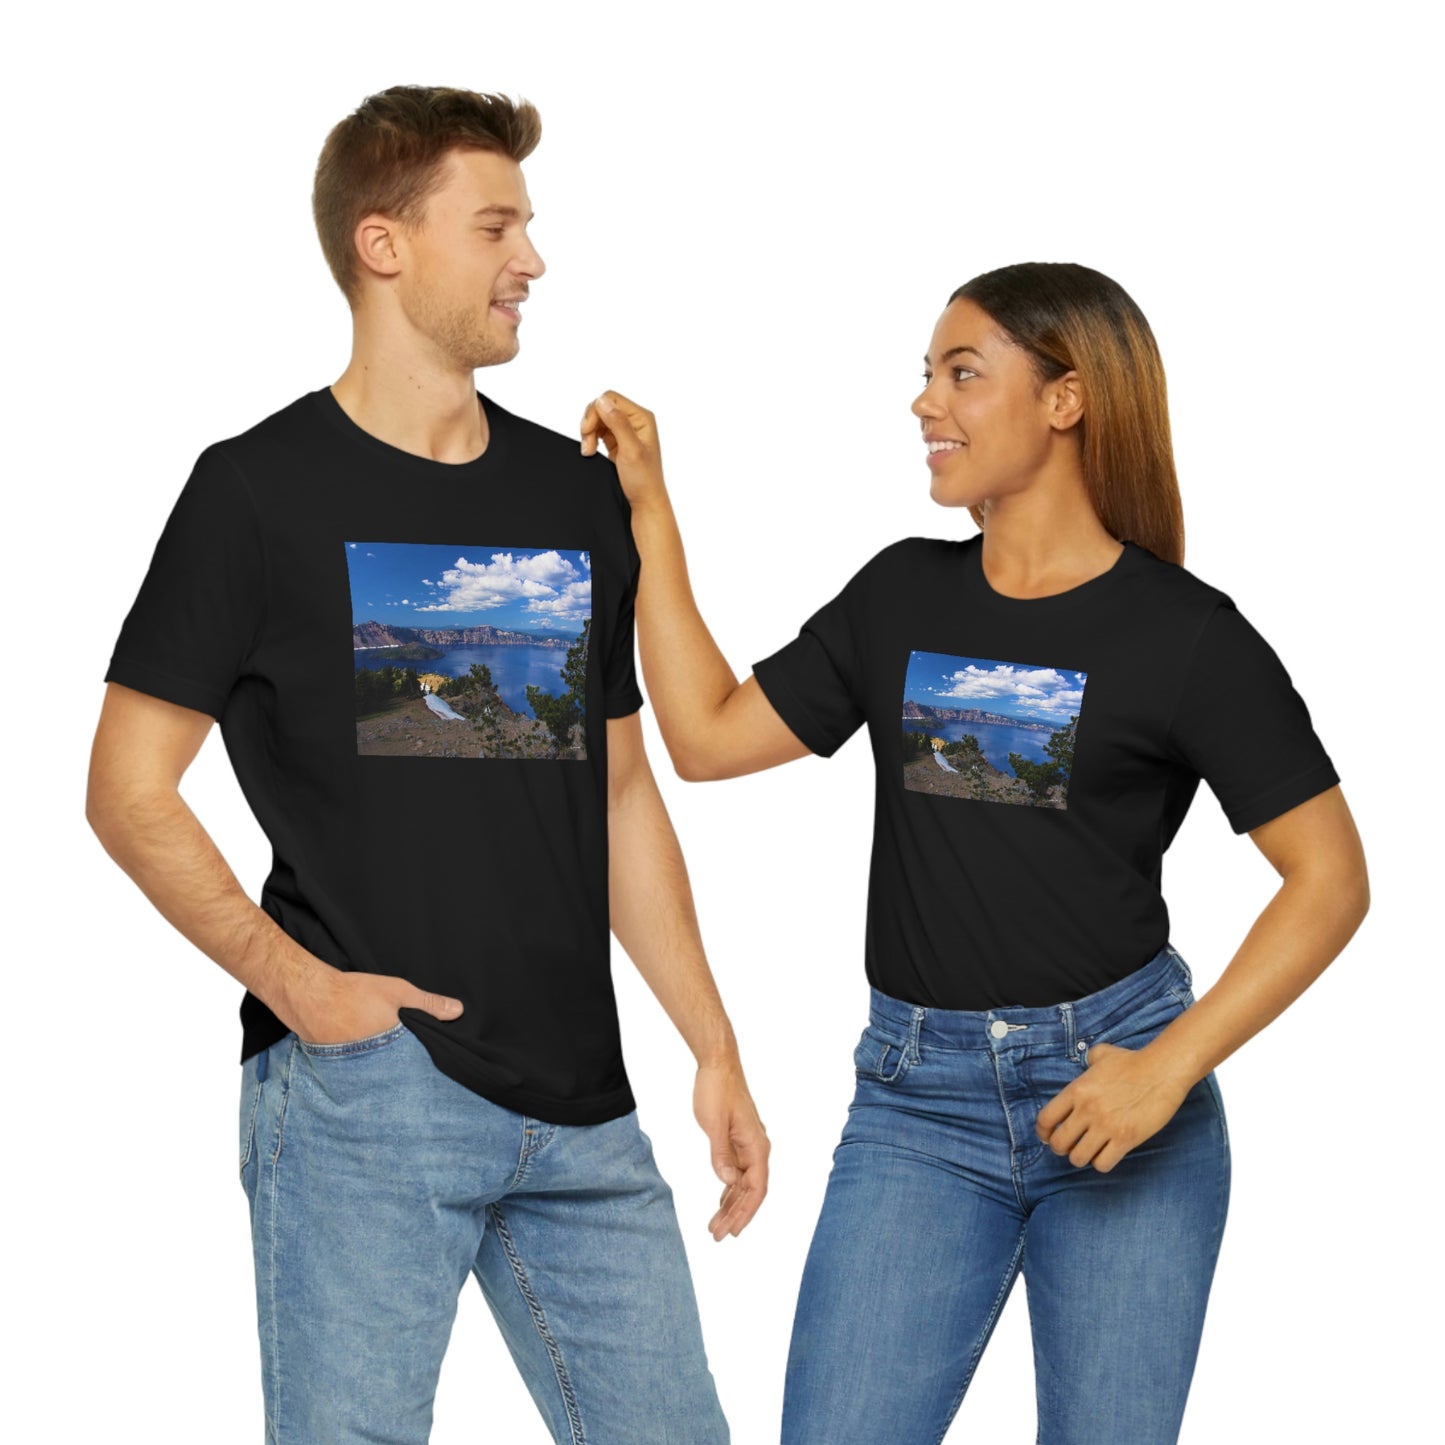 Crater Lake, Crater Lake National Park Or. USA Unisex Jersey Short Sleeve Tee